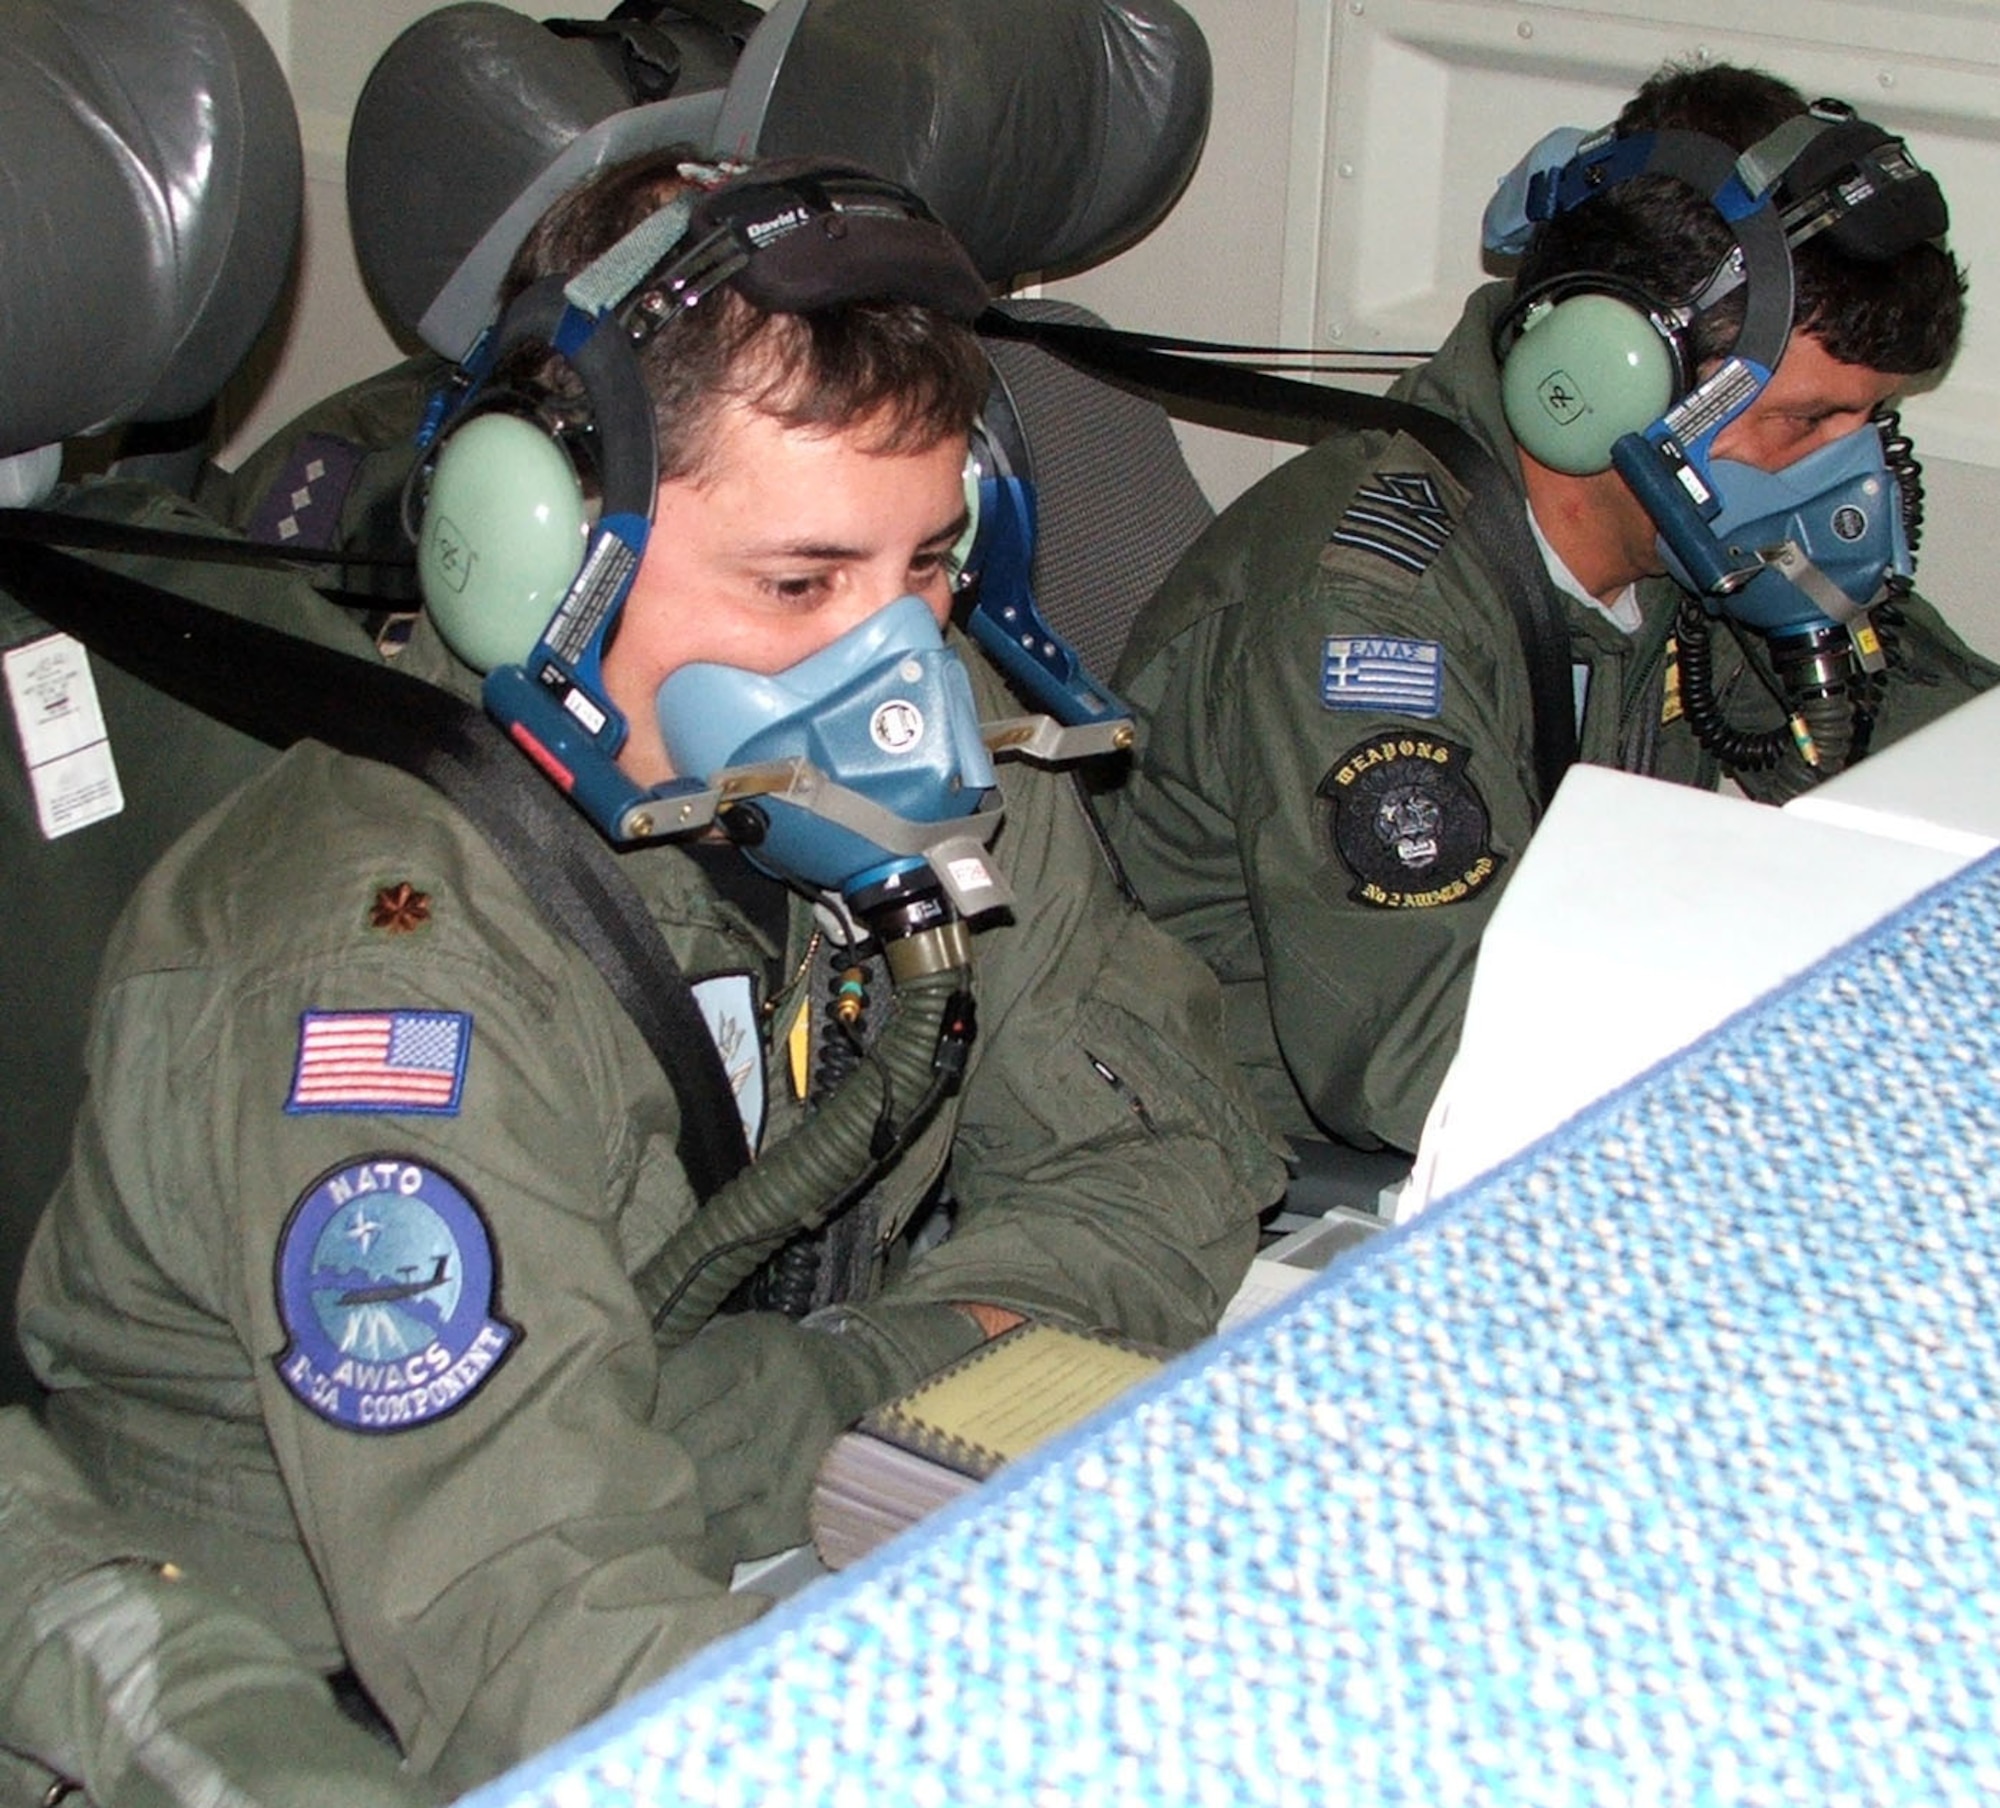 Major Sean Spradlin and Maj. Ioannis Tsakiris, crew members, examine their radars that let pilots know where enemy aircraft are positioned on board a E-3ANMT aircraft(AWAC) from Geilenkirchen North Atlantic Treaty Organization Air Base, Germany on  Aug 15, 2008 on Seymour Johnson Air force Base. On this aircraft there were Air Force members from Turkey, Portugal, United States, Denmark, Germany, Greece, and Canada.(U.S. Air Force photo by Airman 1st Class Gino Reyes)